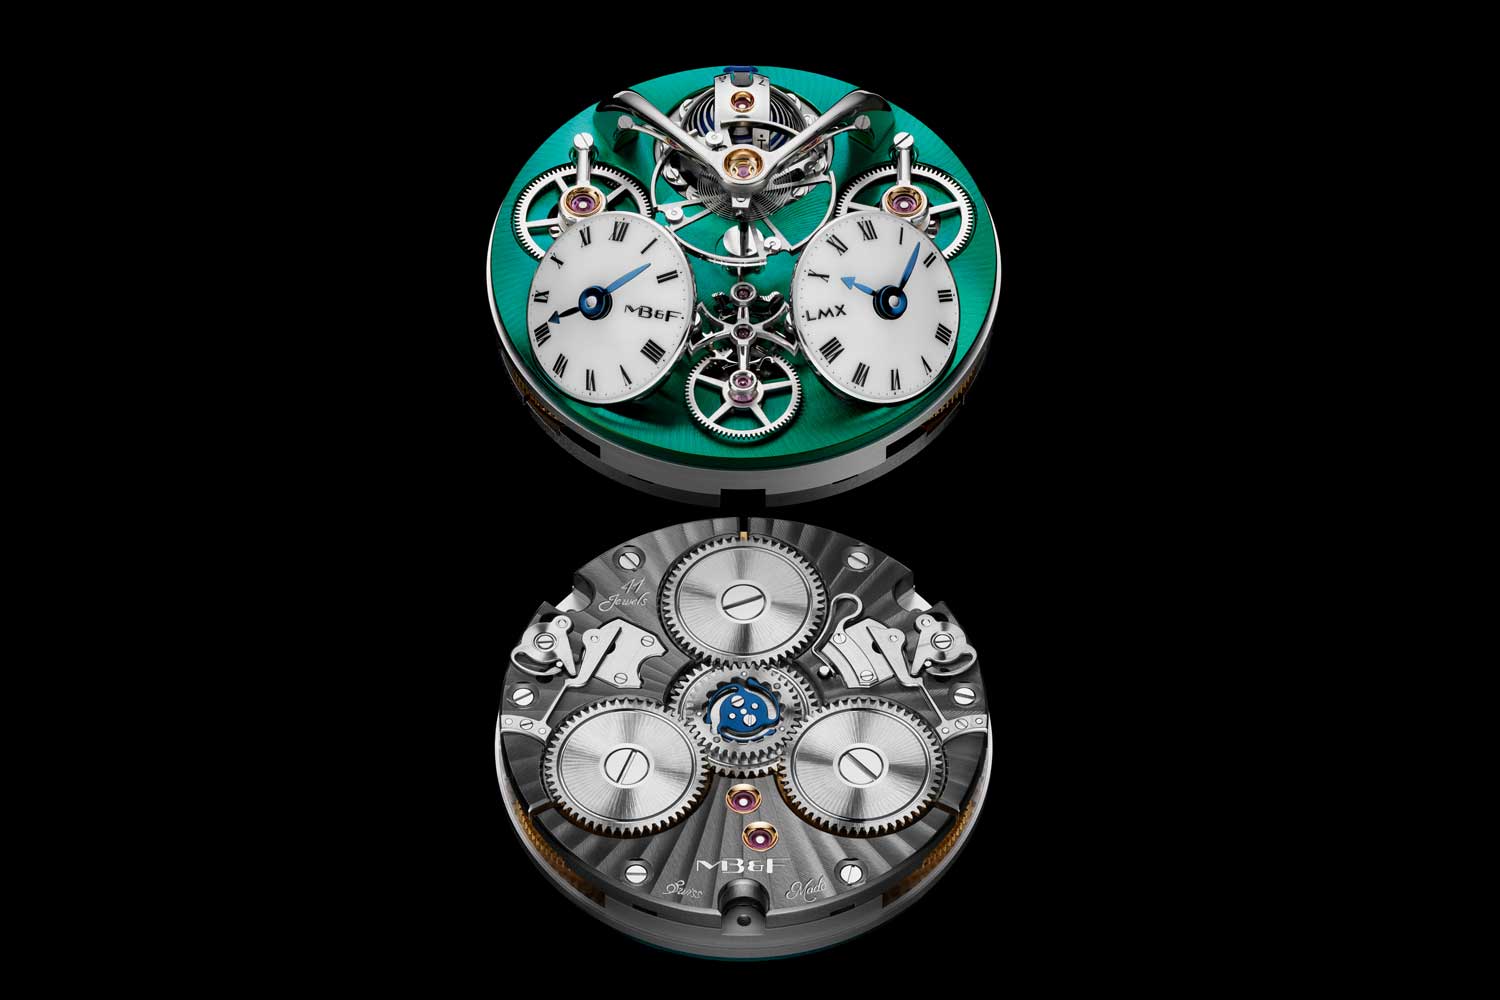 The MB&F LMX in polished grade 5 titanium with green CVD treatment on plates and bridges